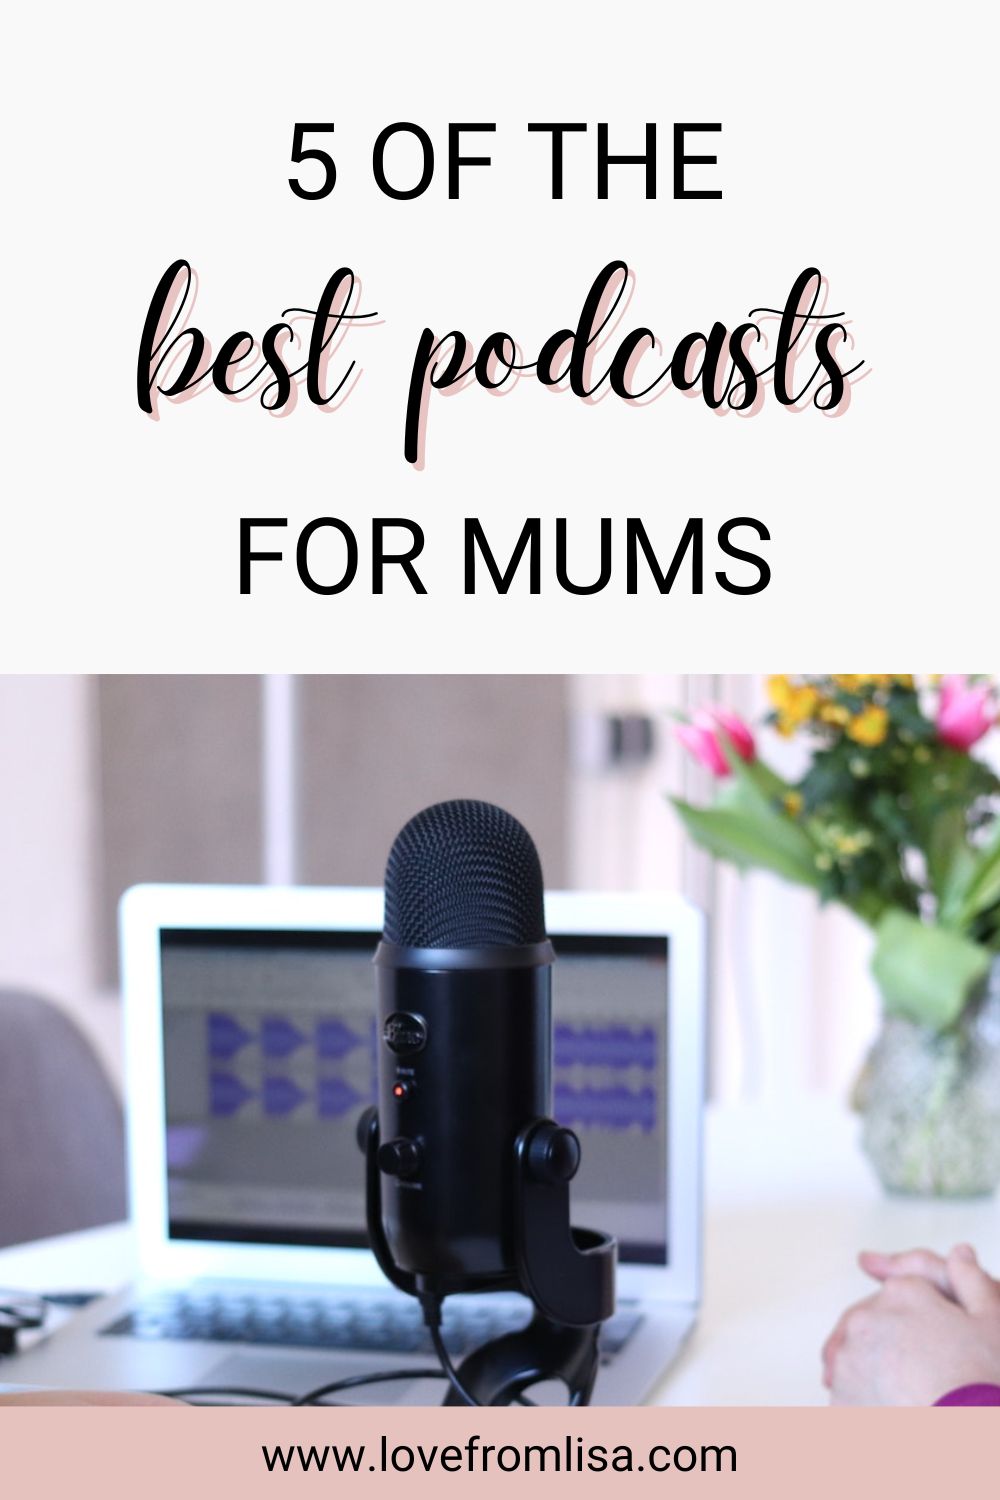 The best podcasts for mums